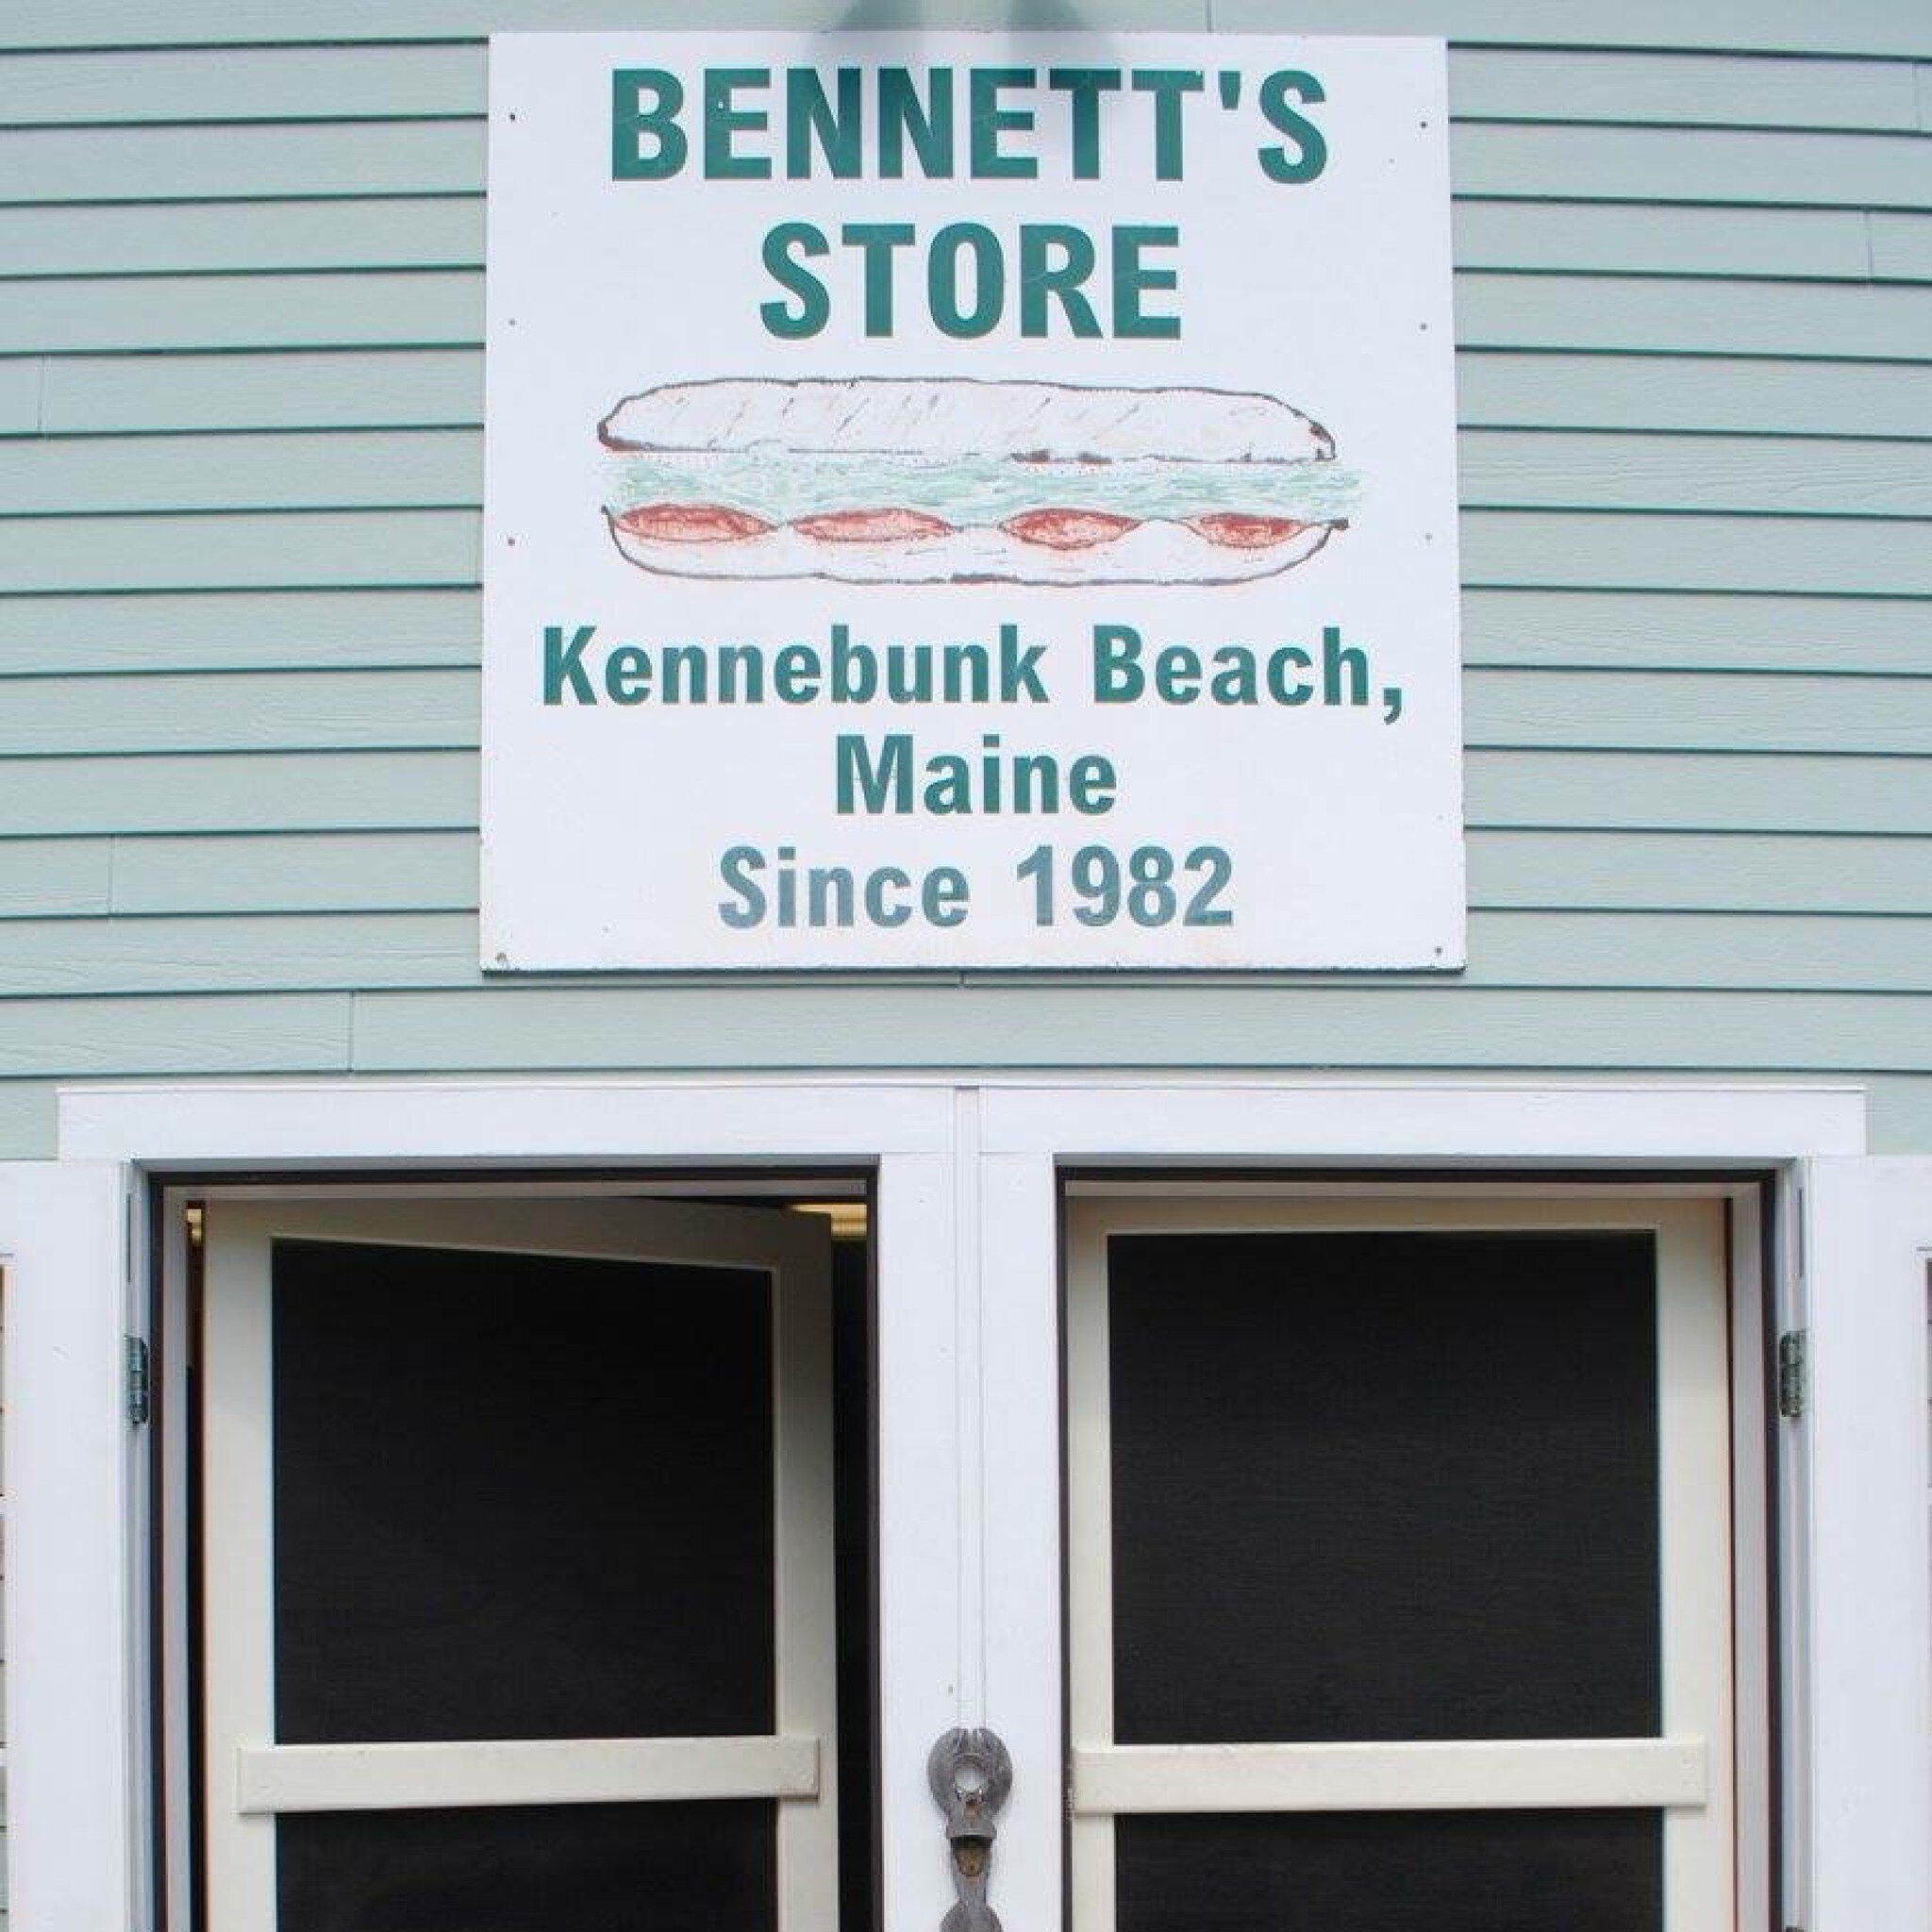 Some blasts from the past in honor of our Annual Kennebunk Super Hiring Day coming up!  Join us on Saturday, March 30th from 8:30 - 10:00am at our Kennebunk location. Please spread the word to friends and family looking for a fun and fulfilling summe